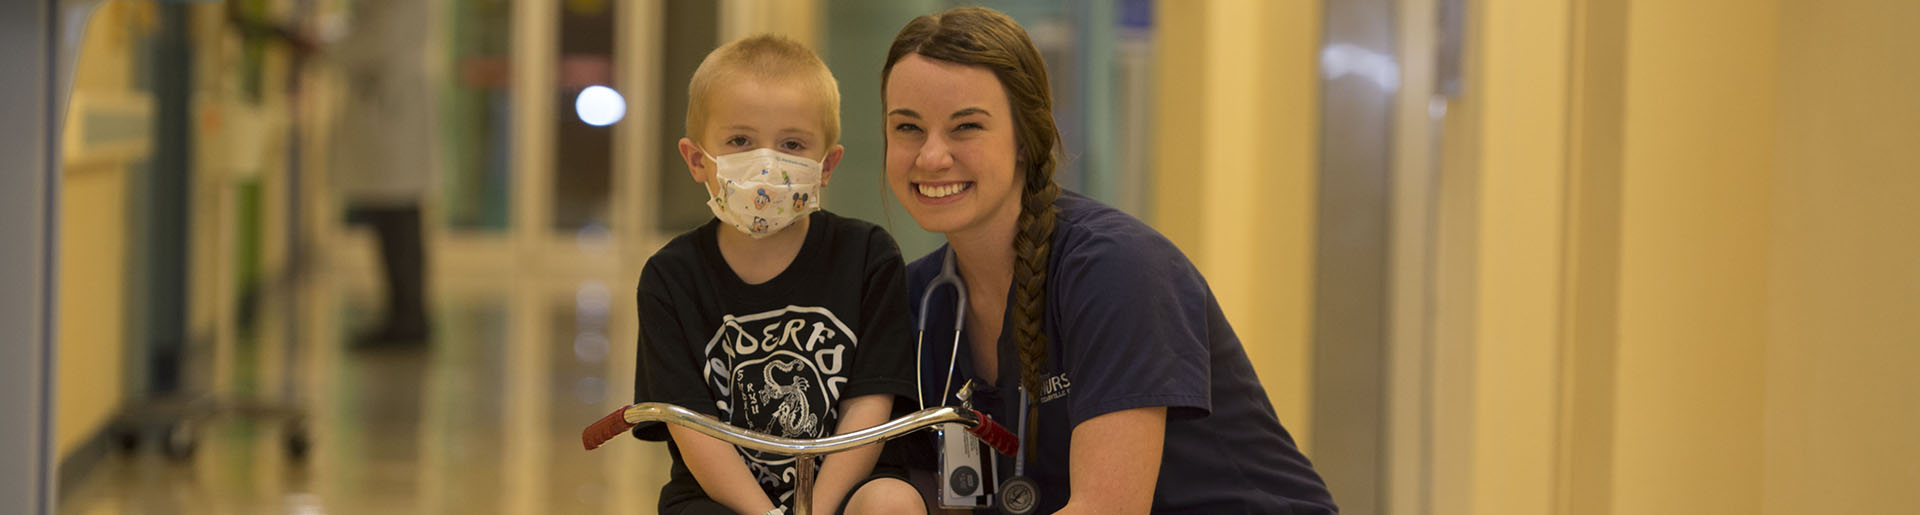 A Cedarville University nursing student encourages a young patient in a hospital.